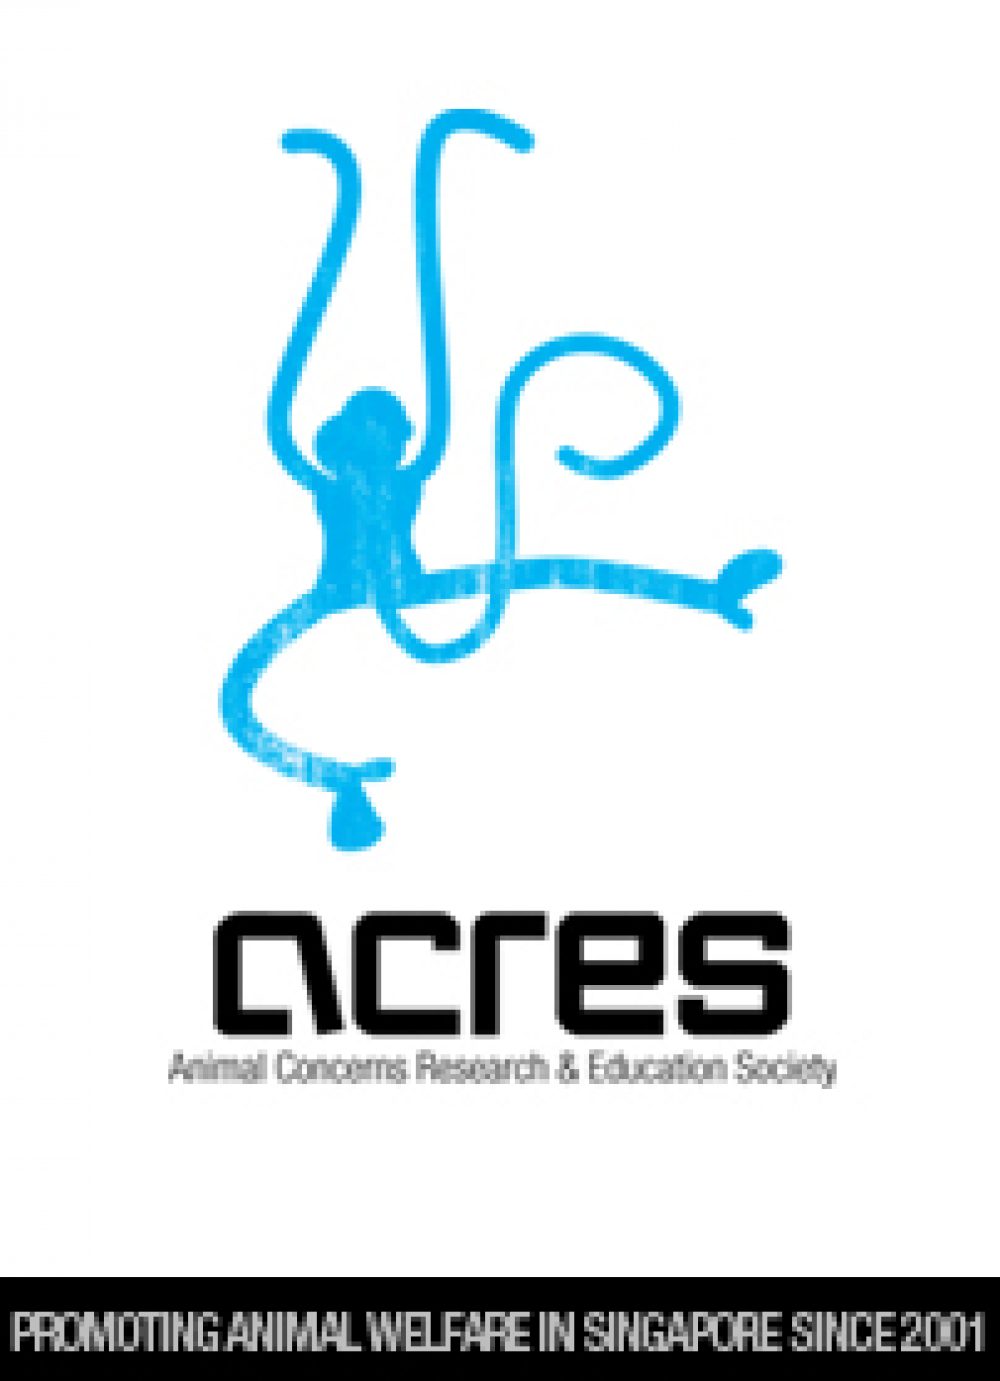 Animal Concerns Research & Education Society (ACRES)